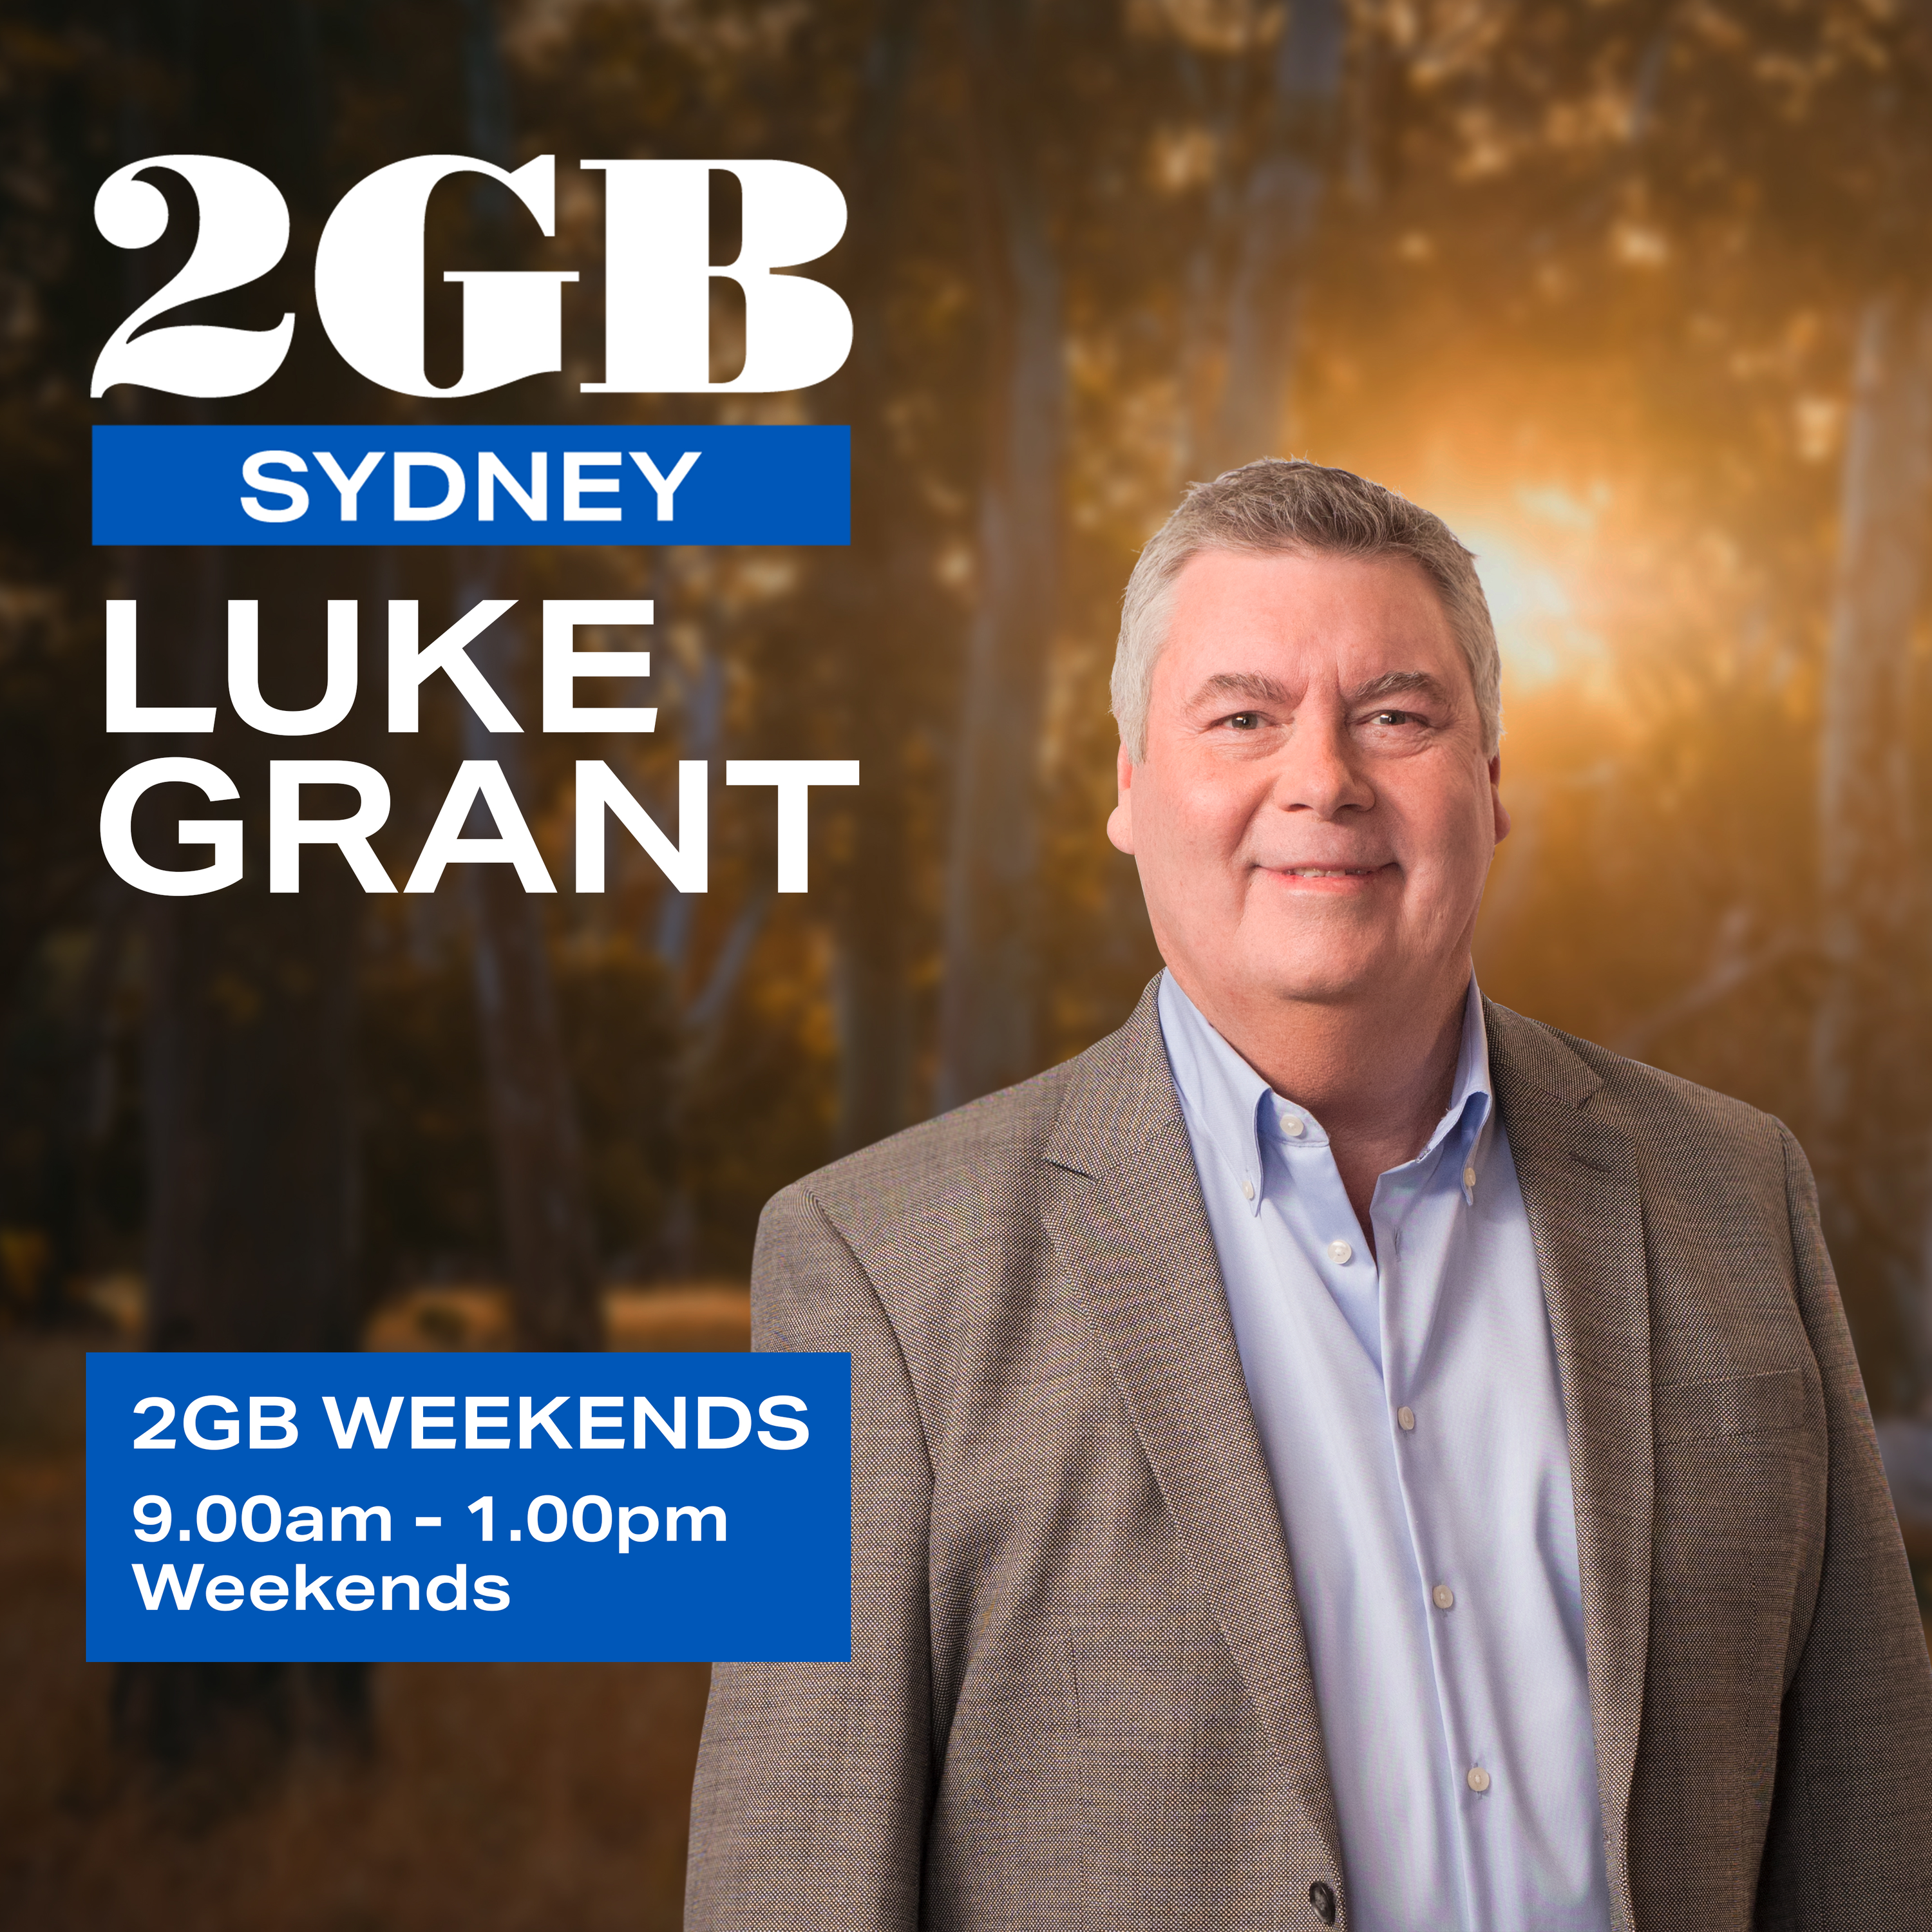 Weekends with Luke Grant - Sunday, 21st of April